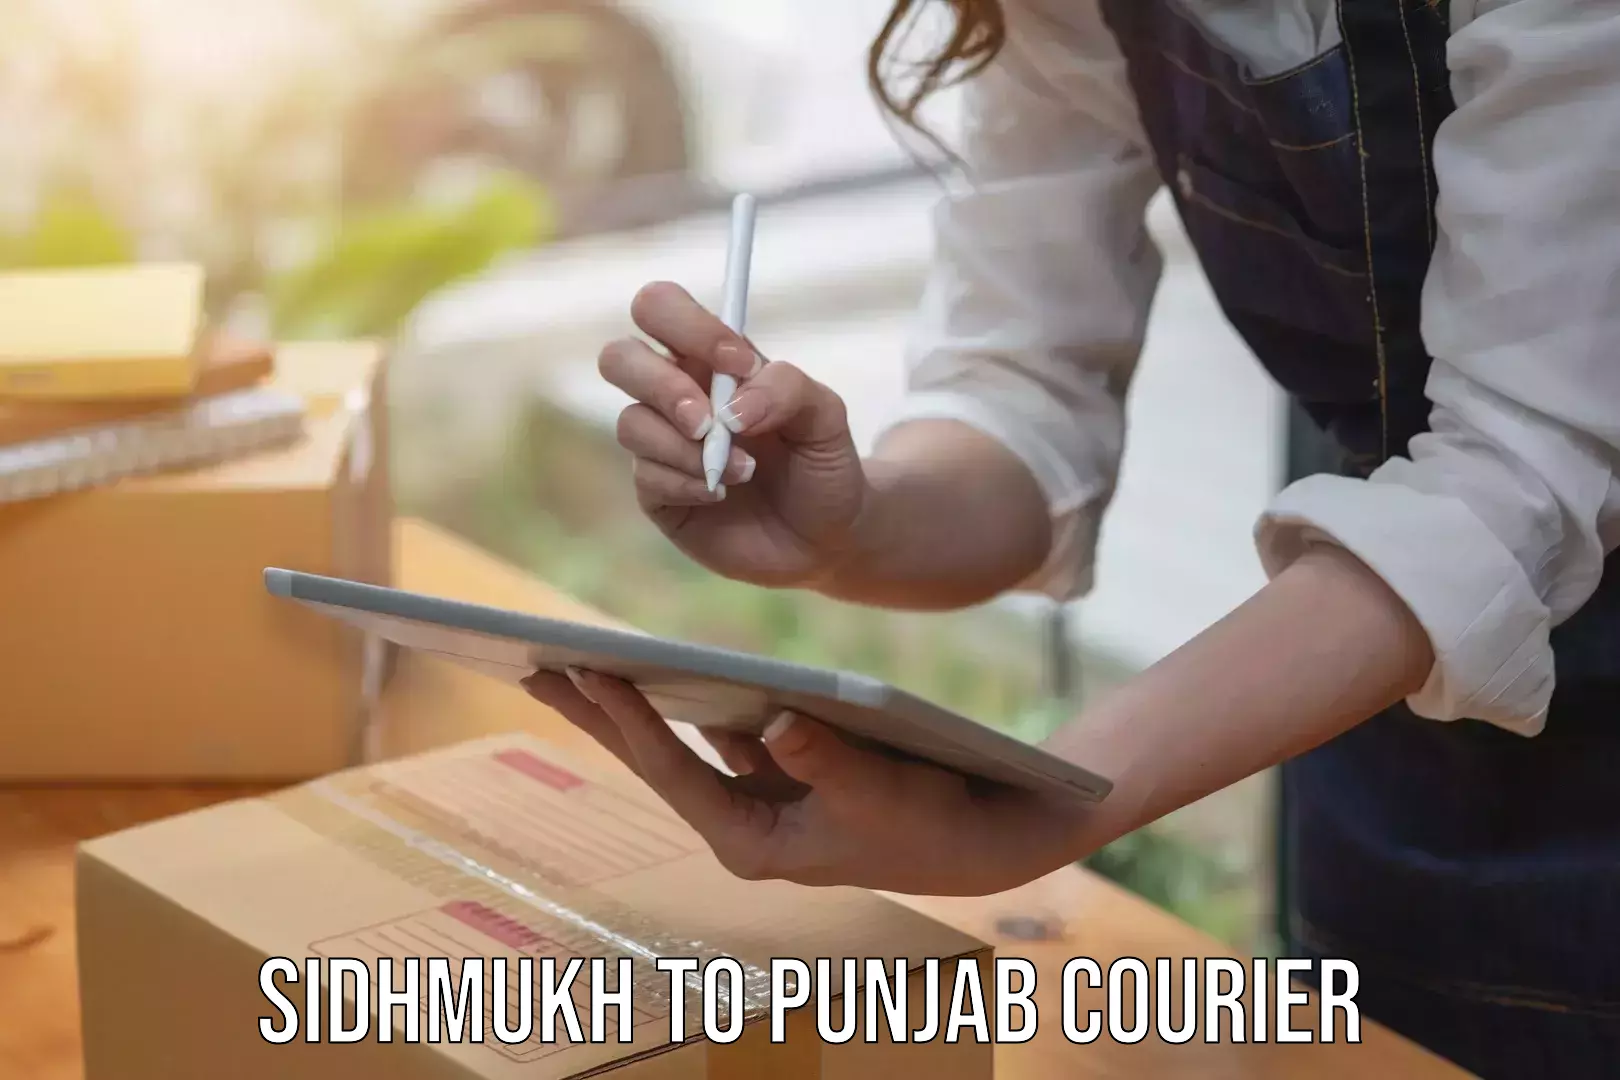 Fast delivery service Sidhmukh to Punjab